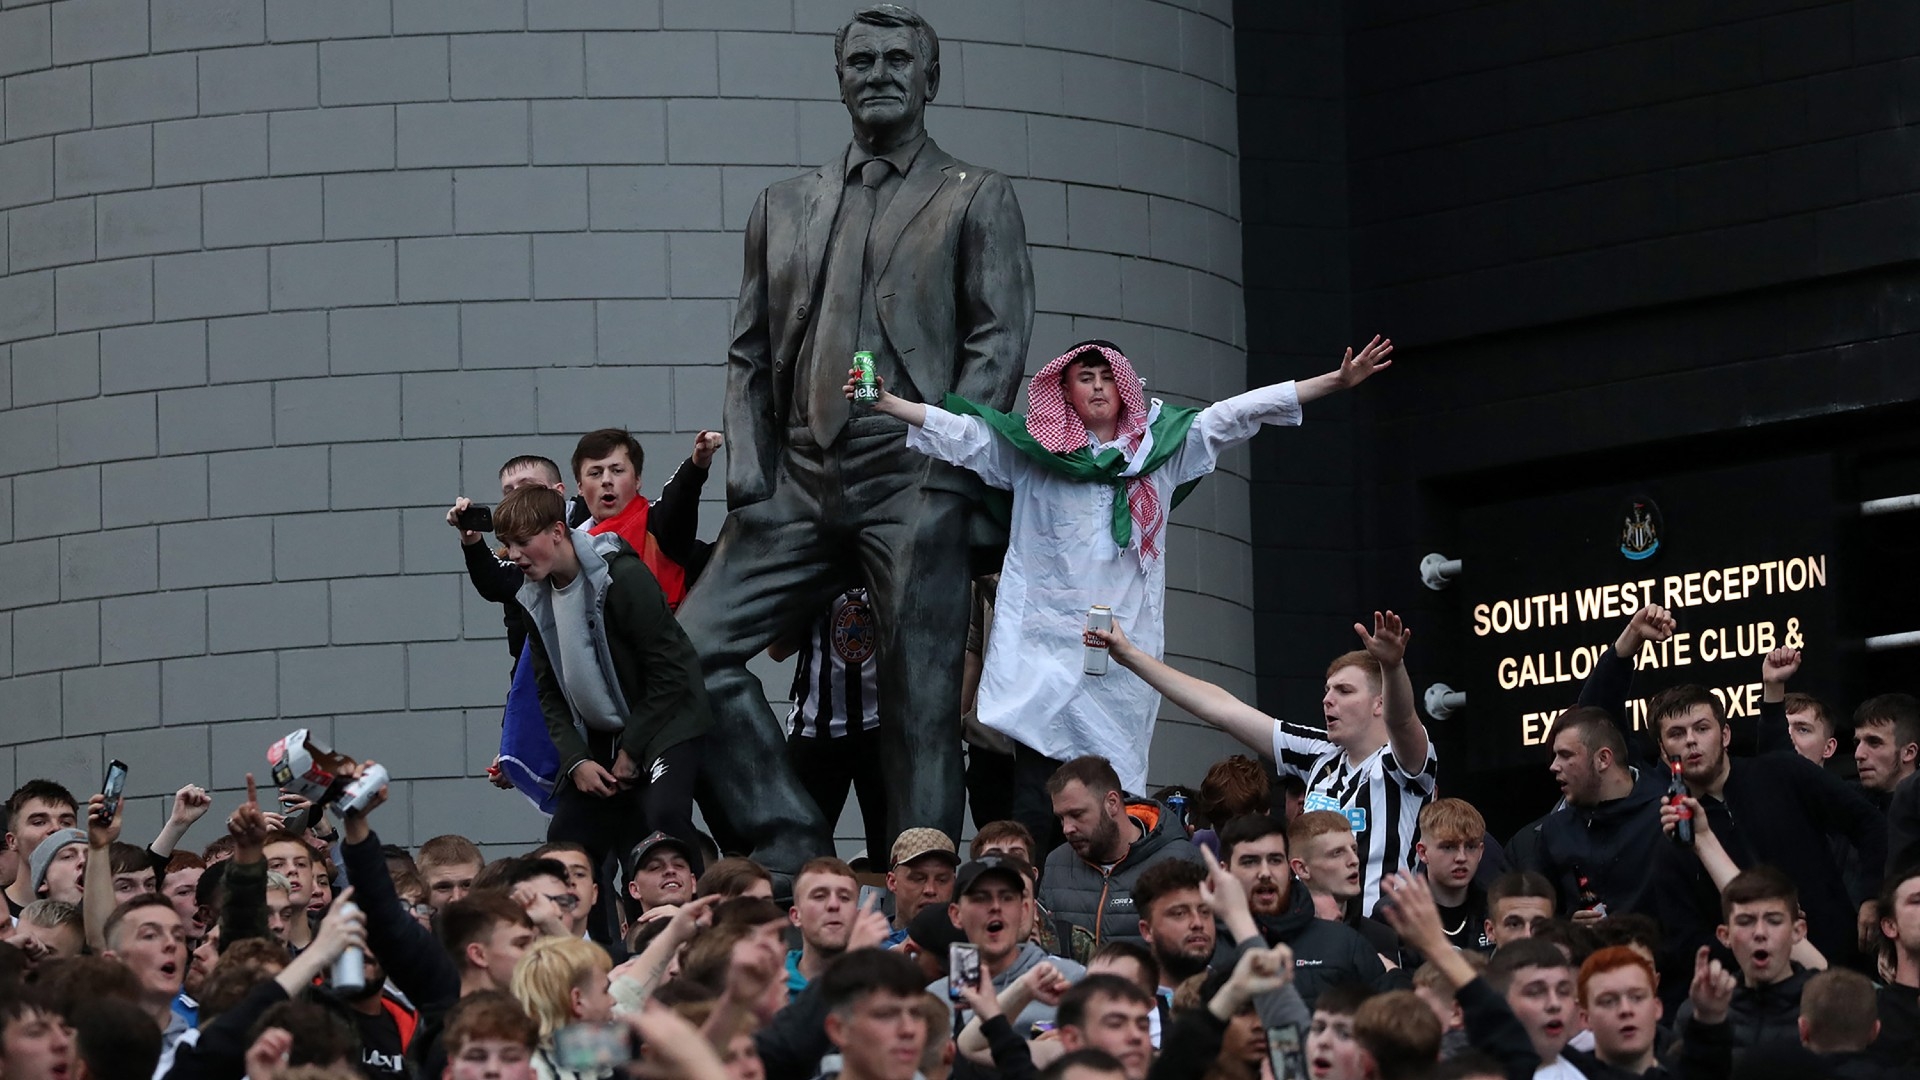 Newcastle United supporters celebrate a Saudi-led consortium taking over their club in Newcastle, England on 7 October 2021 (AFP)